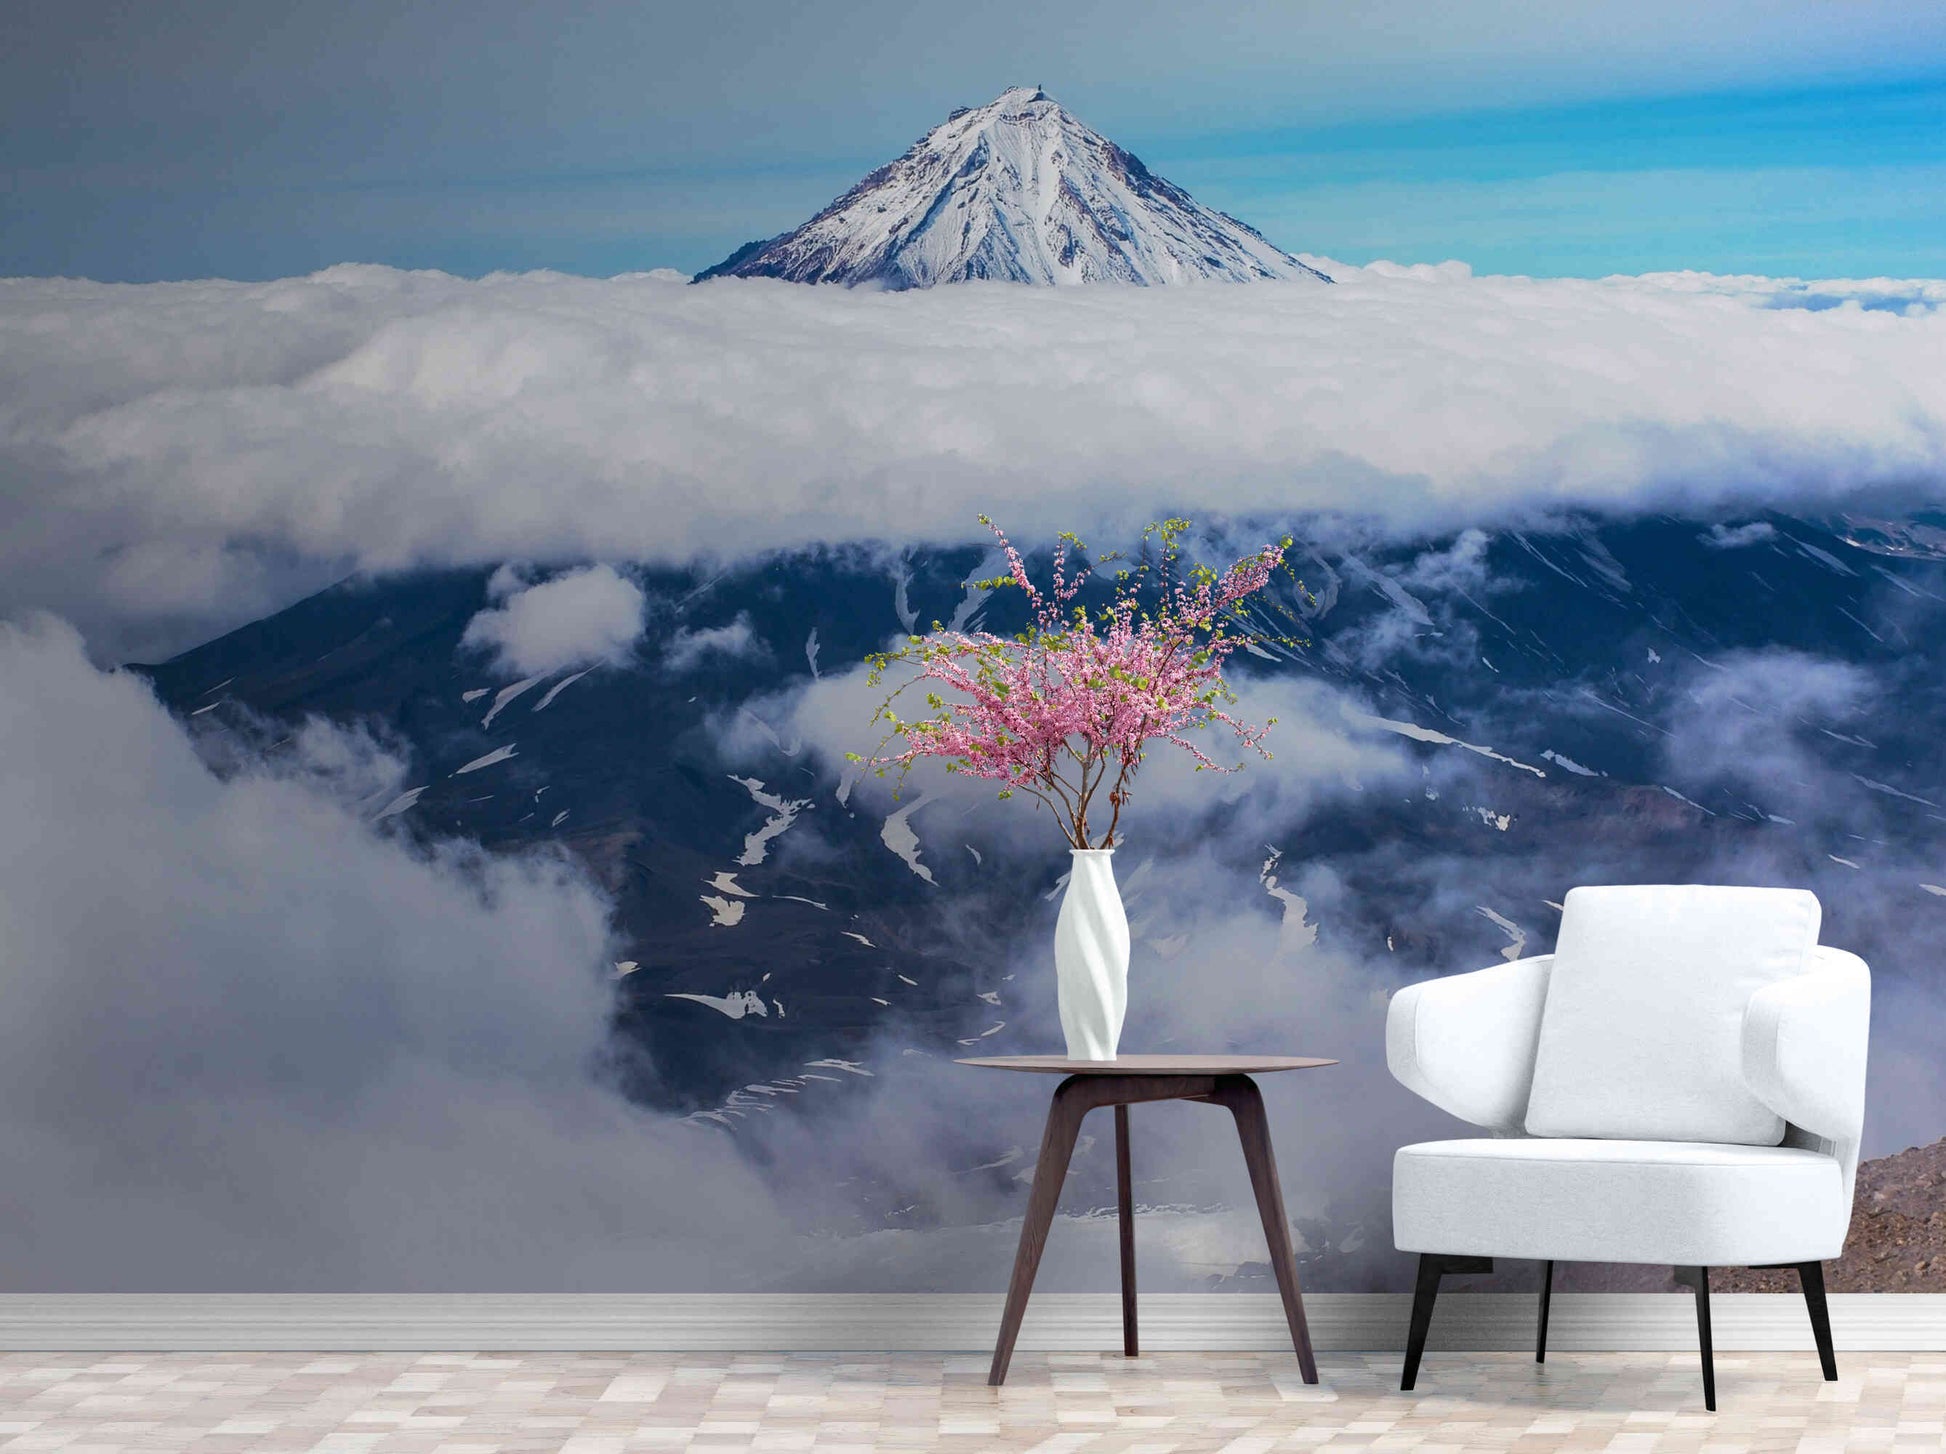 Transform your room with our Mountain Wall Mural Wallpaper, a nature-inspired decor that soothes the soul.